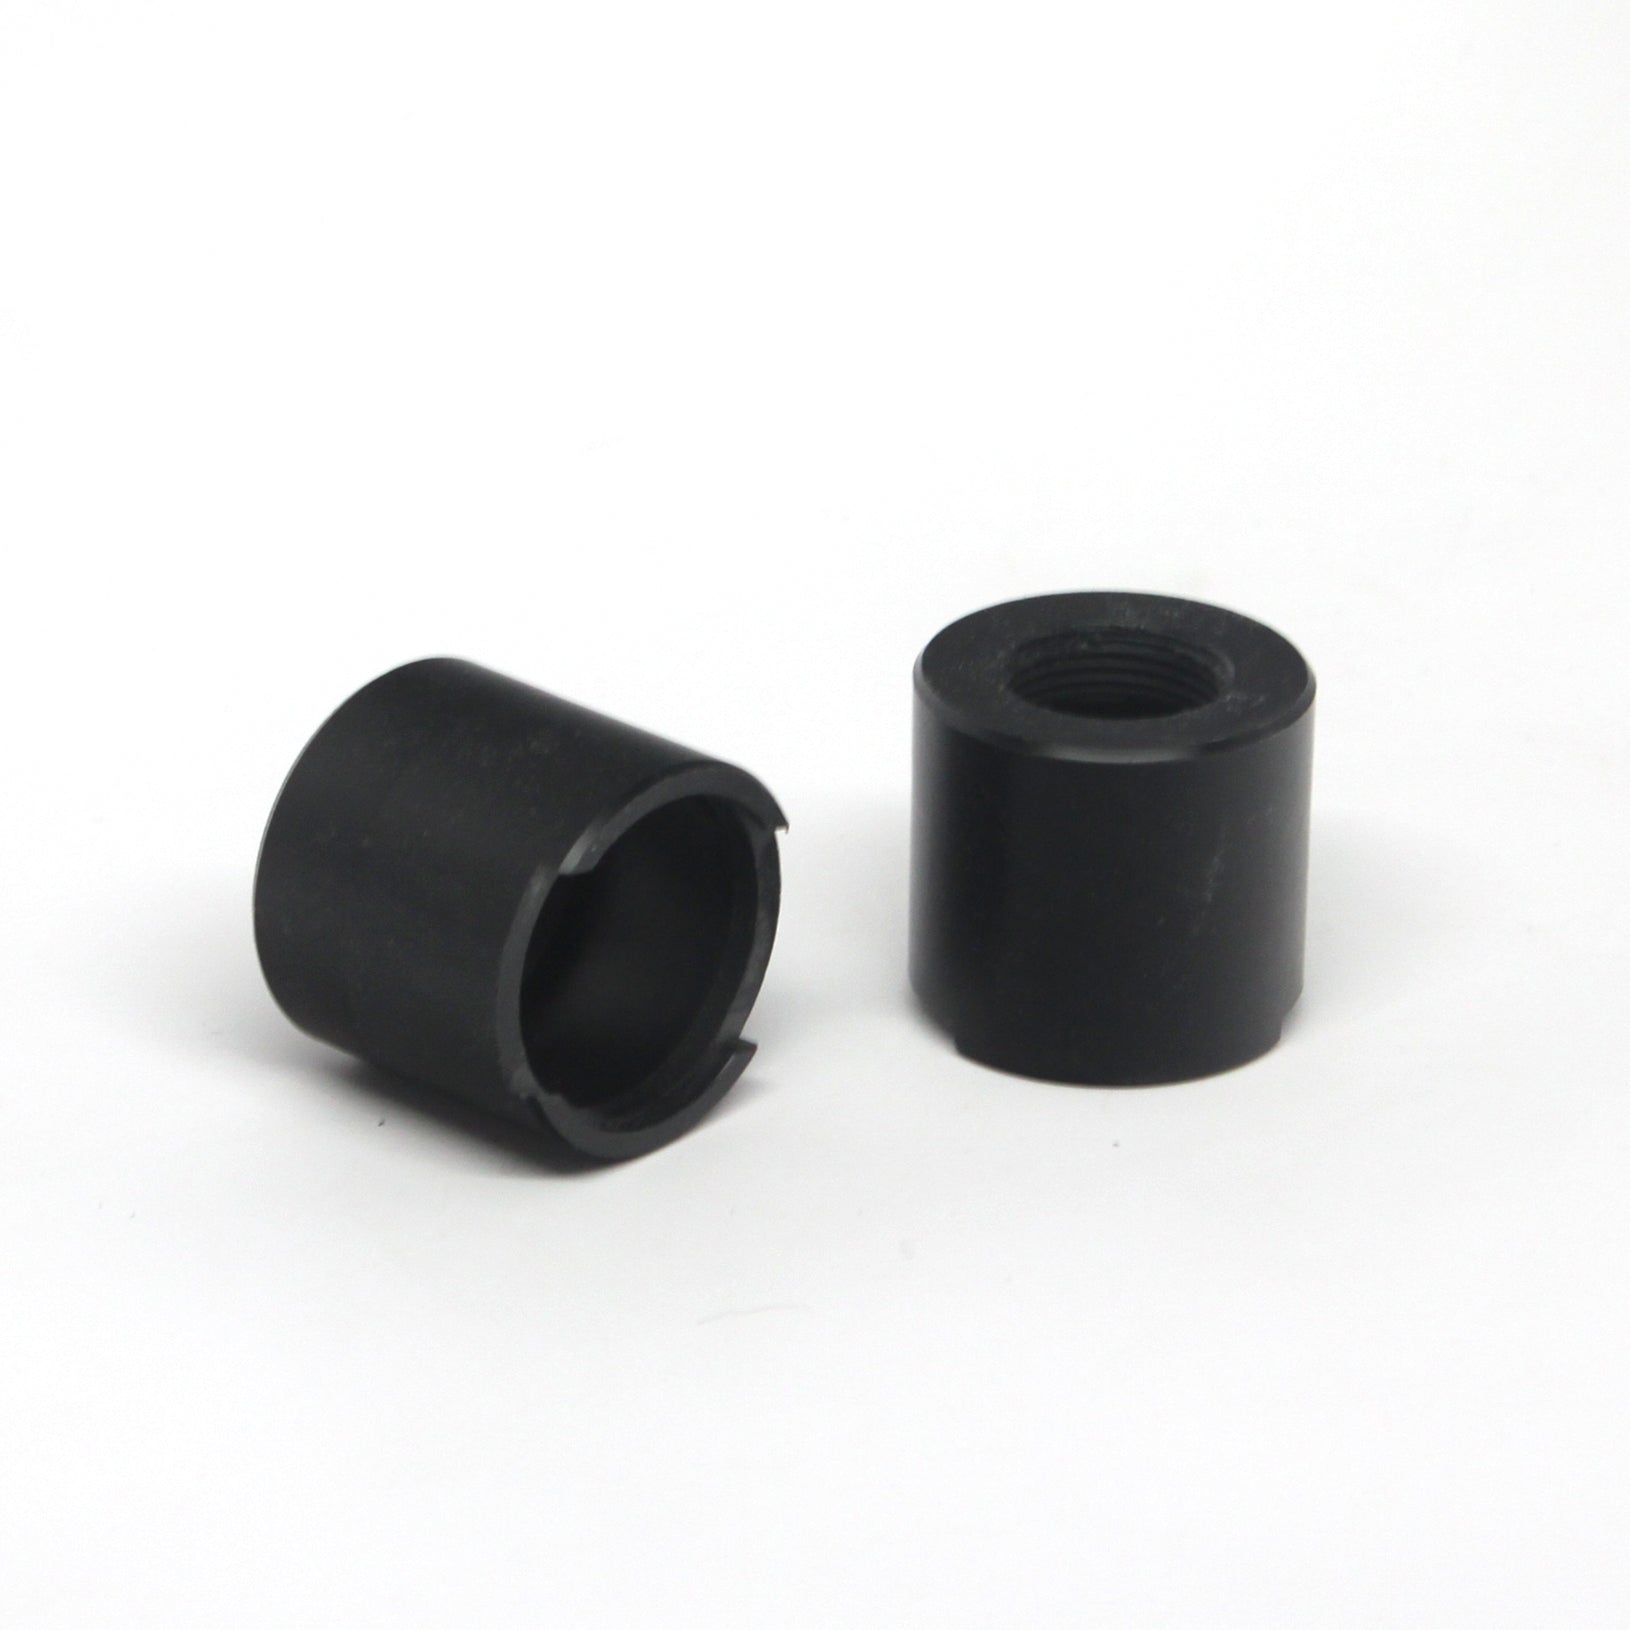 P498430 - Housing for Pushbutton Saniwave and Solidwave Intersan/AquaDesign